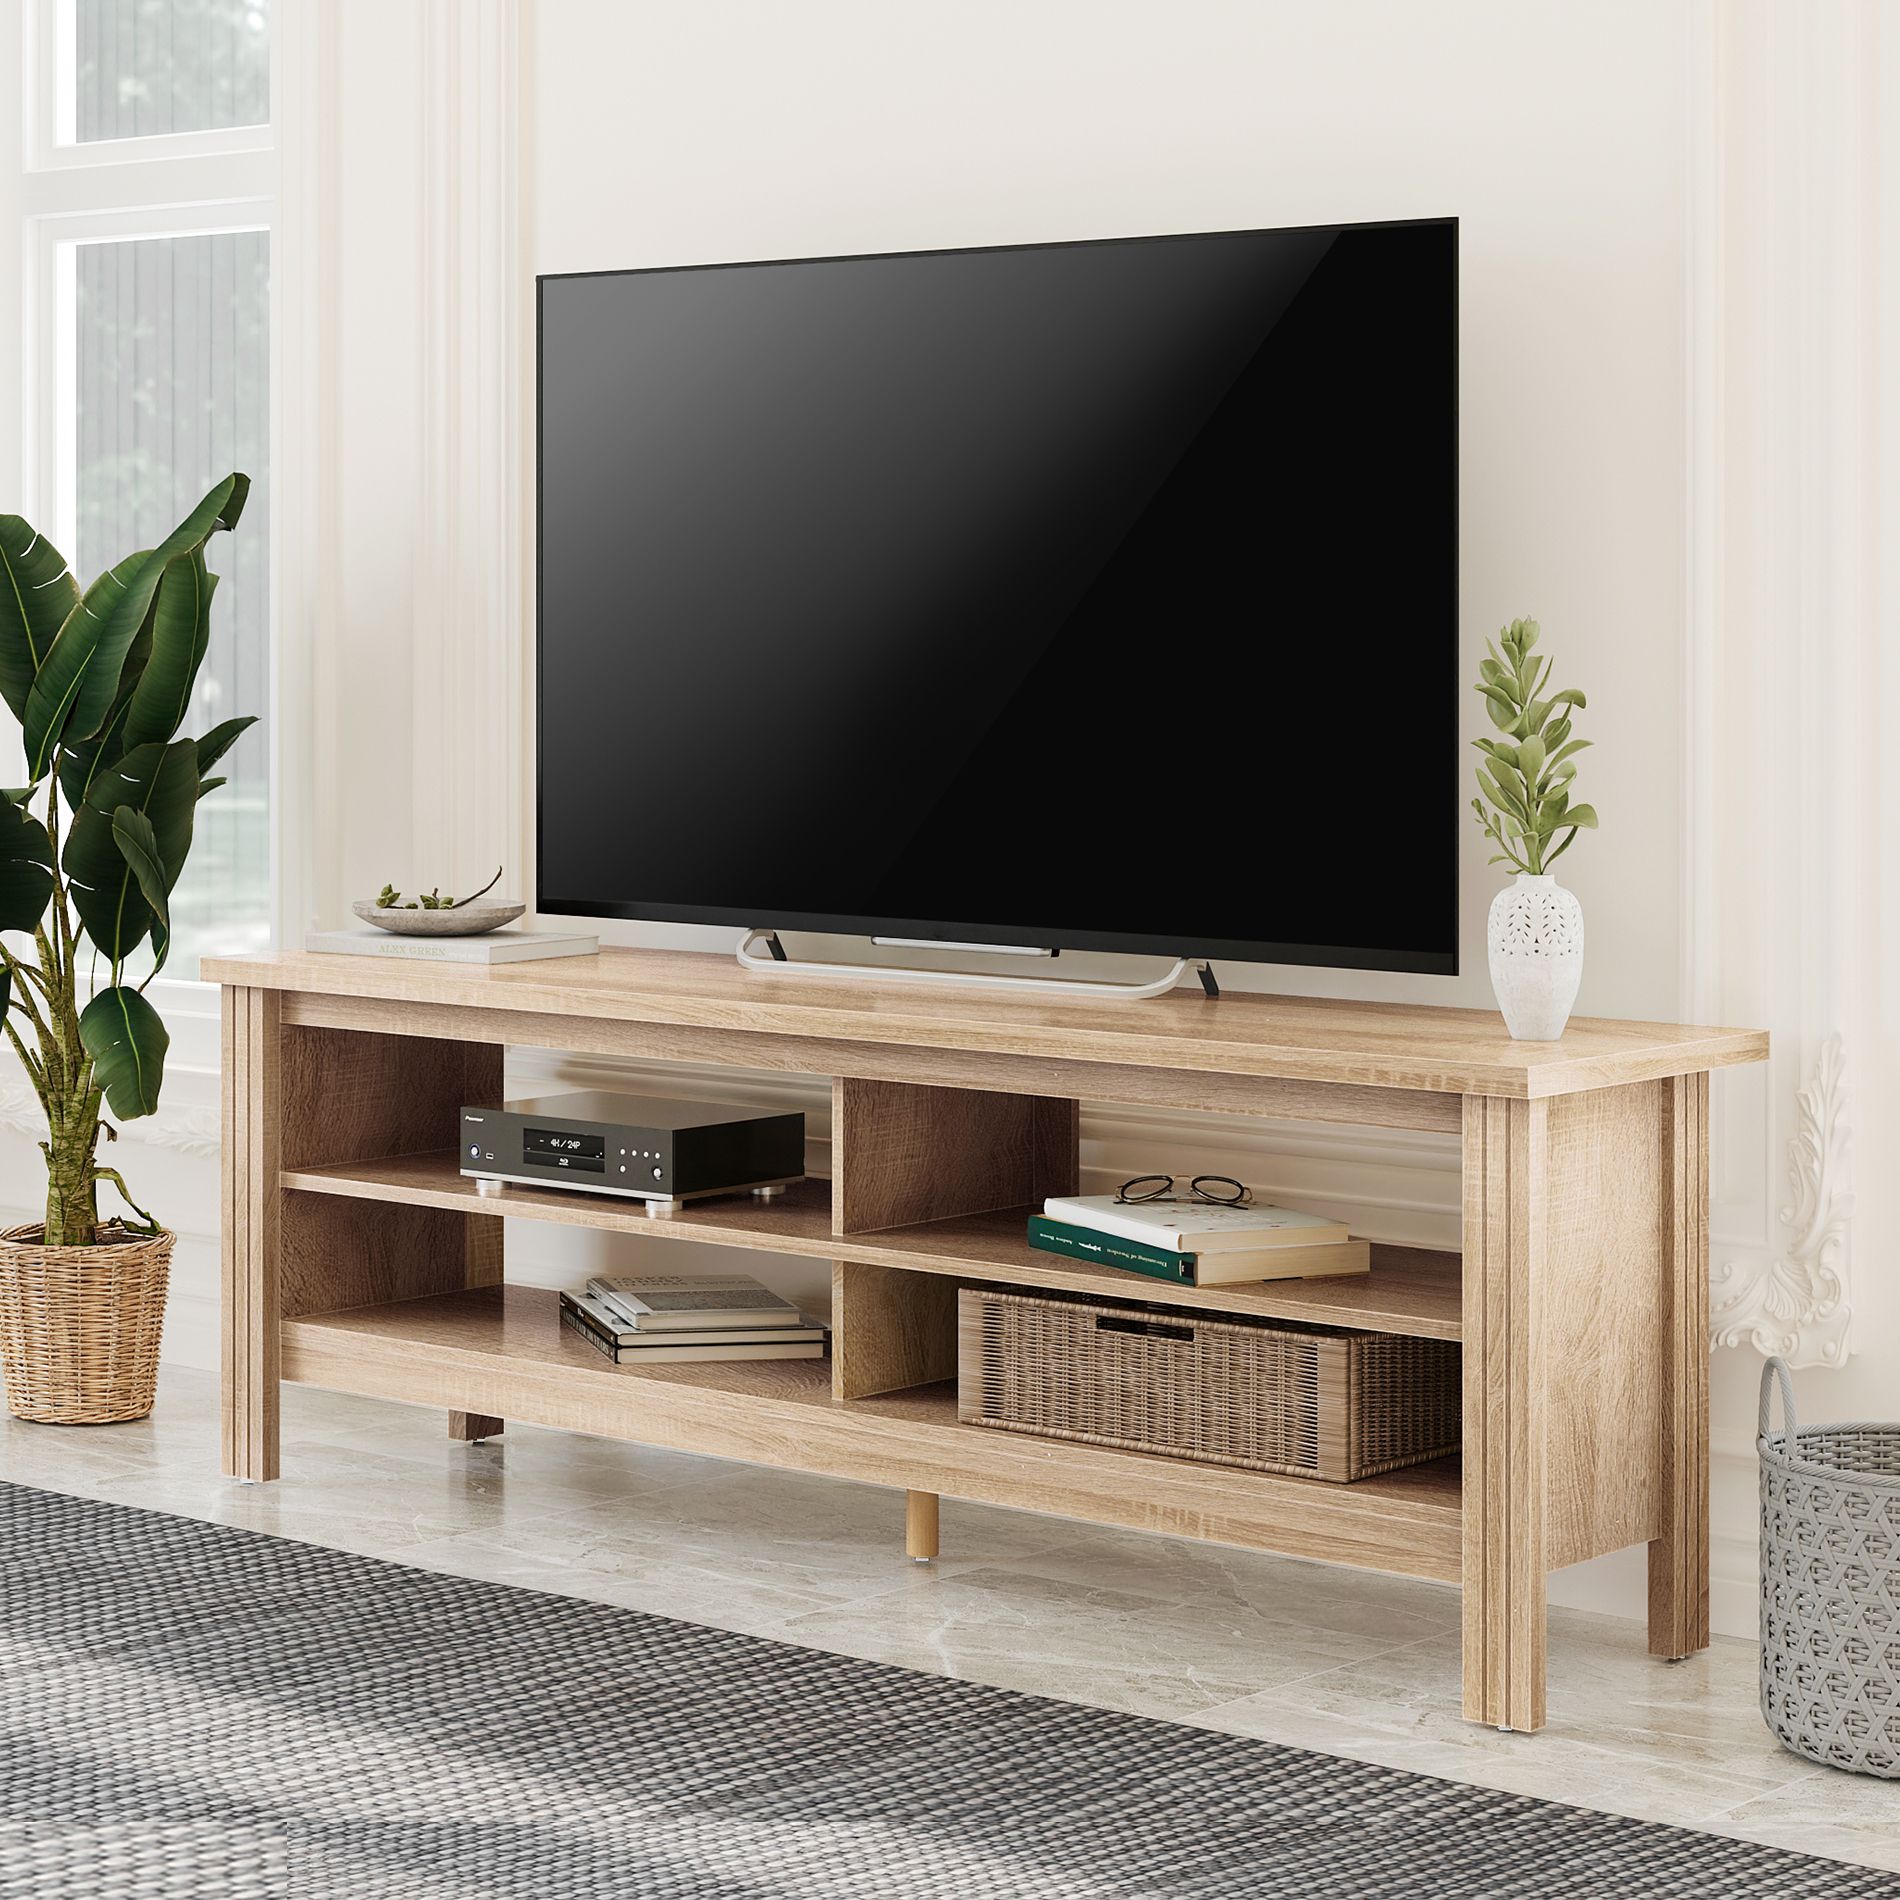 Wampat Farmhouse Tv Stand For 65 Inch Flat Screen, Living For Tv Units With Storage (View 1 of 15)